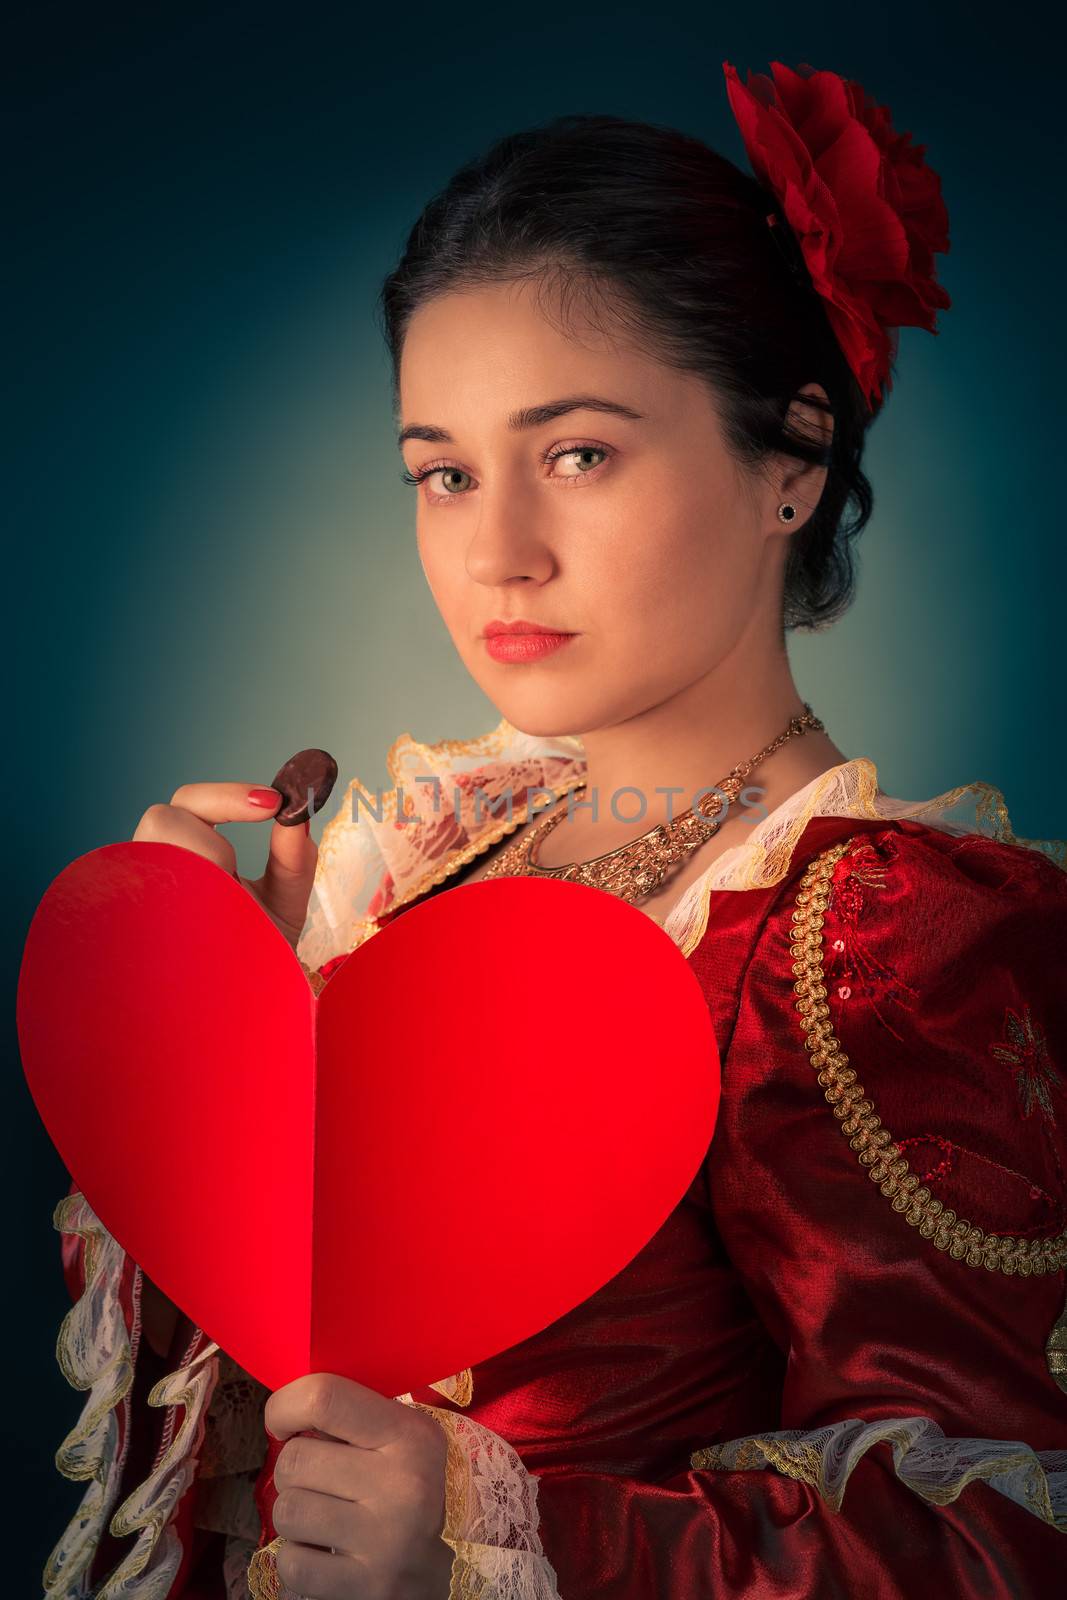 Portrait of a girl wearing a princess dress, holding a heart shaped card and a piece of candy.